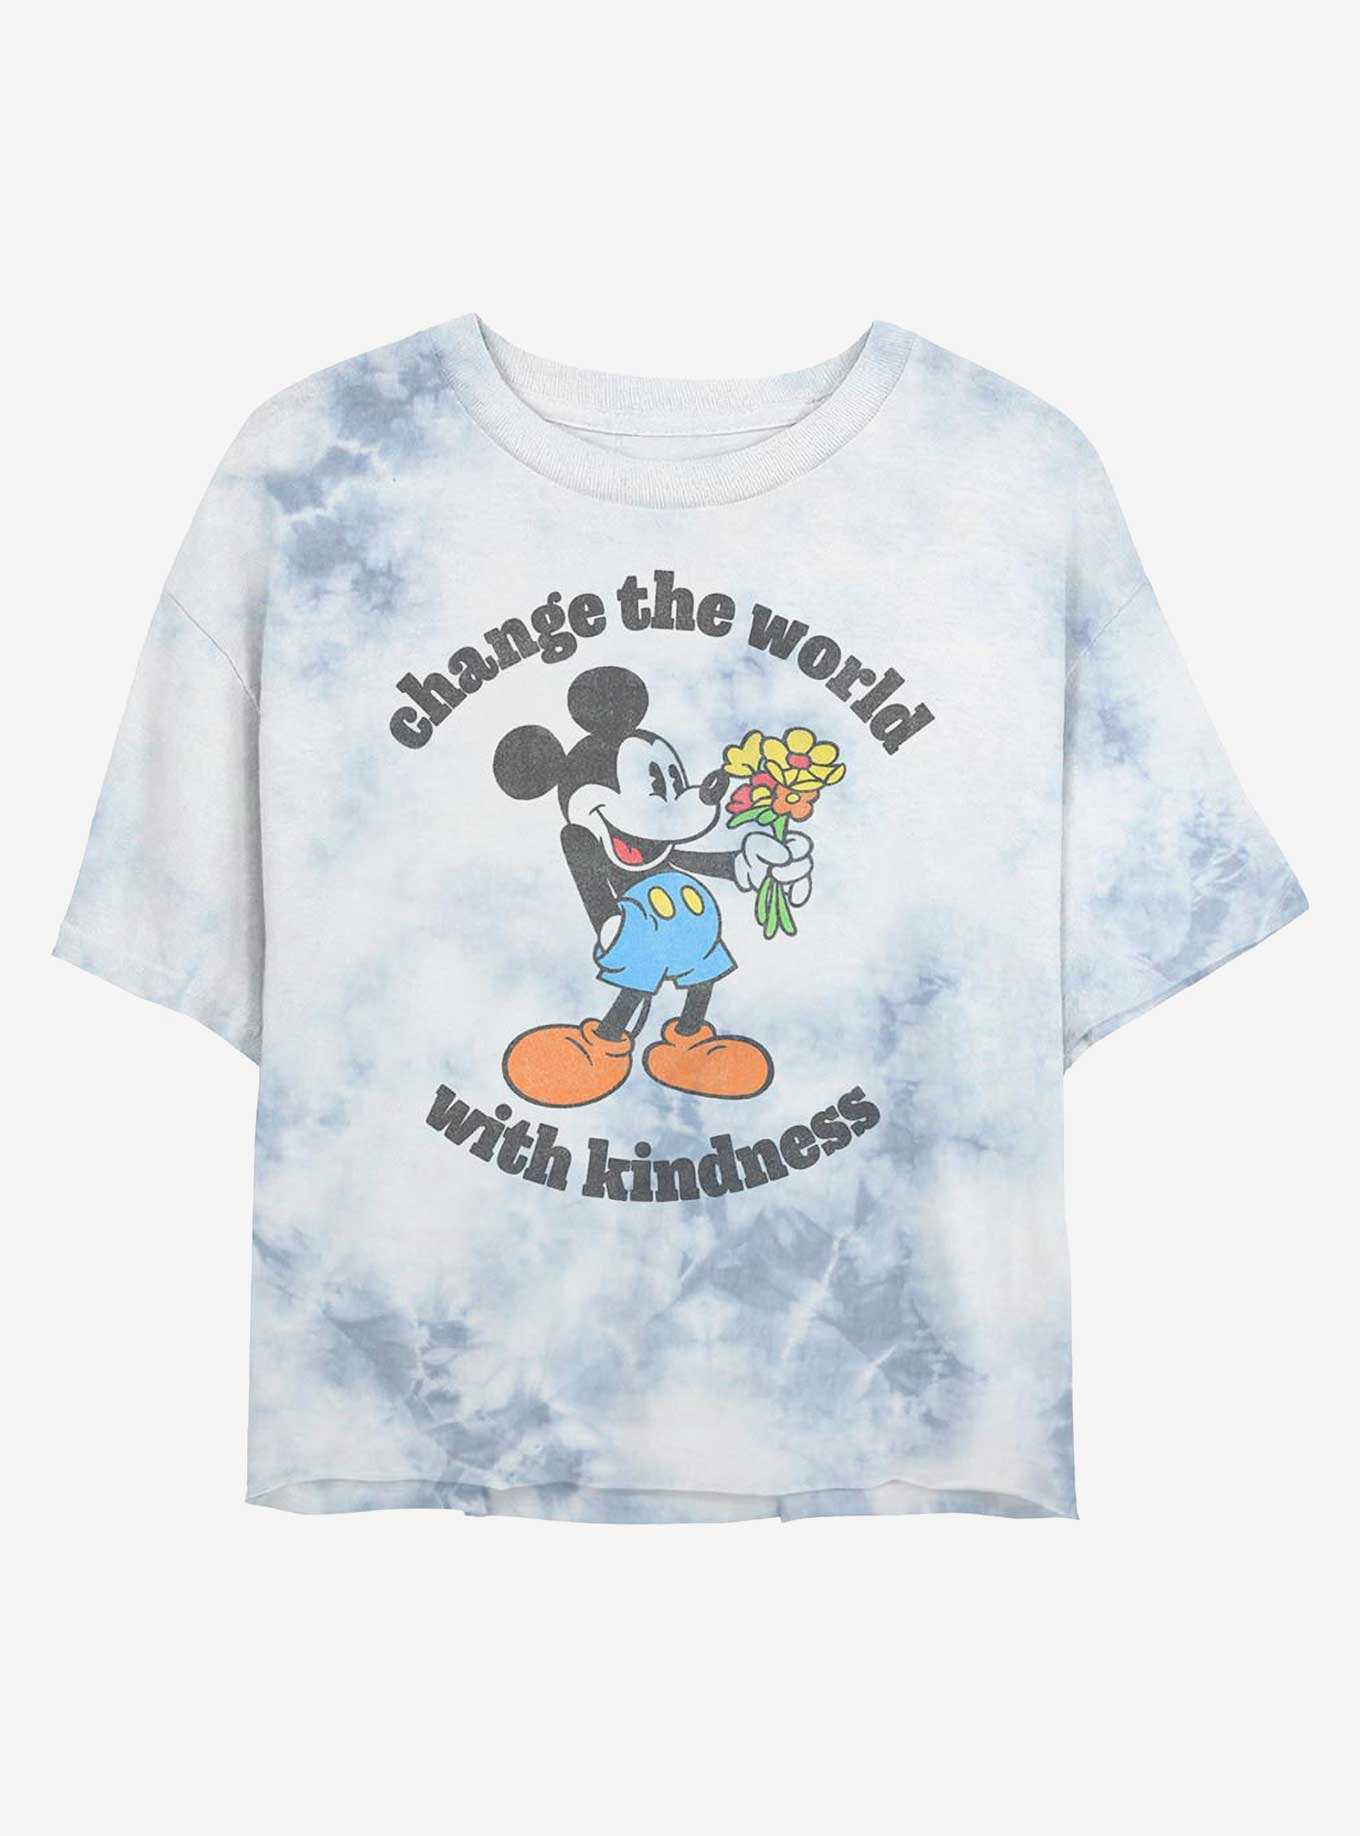 Disney Mickey Mouse Kindness Womens Tie-Dye Crop T-Shirt, , hi-res